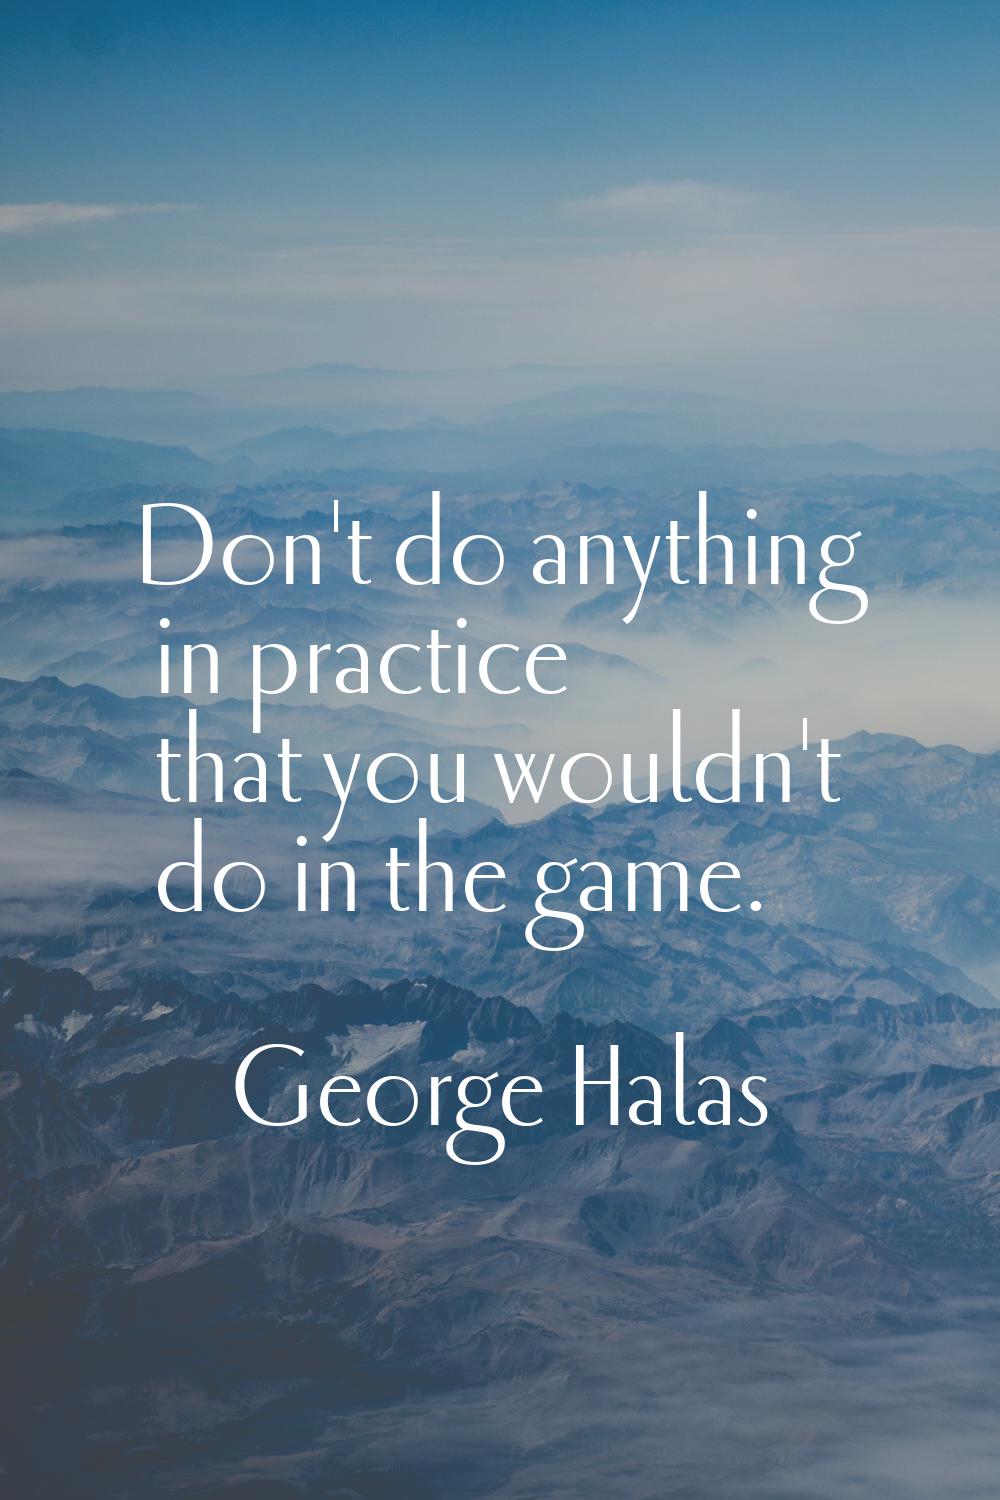 Don't do anything in practice that you wouldn't do in the game.